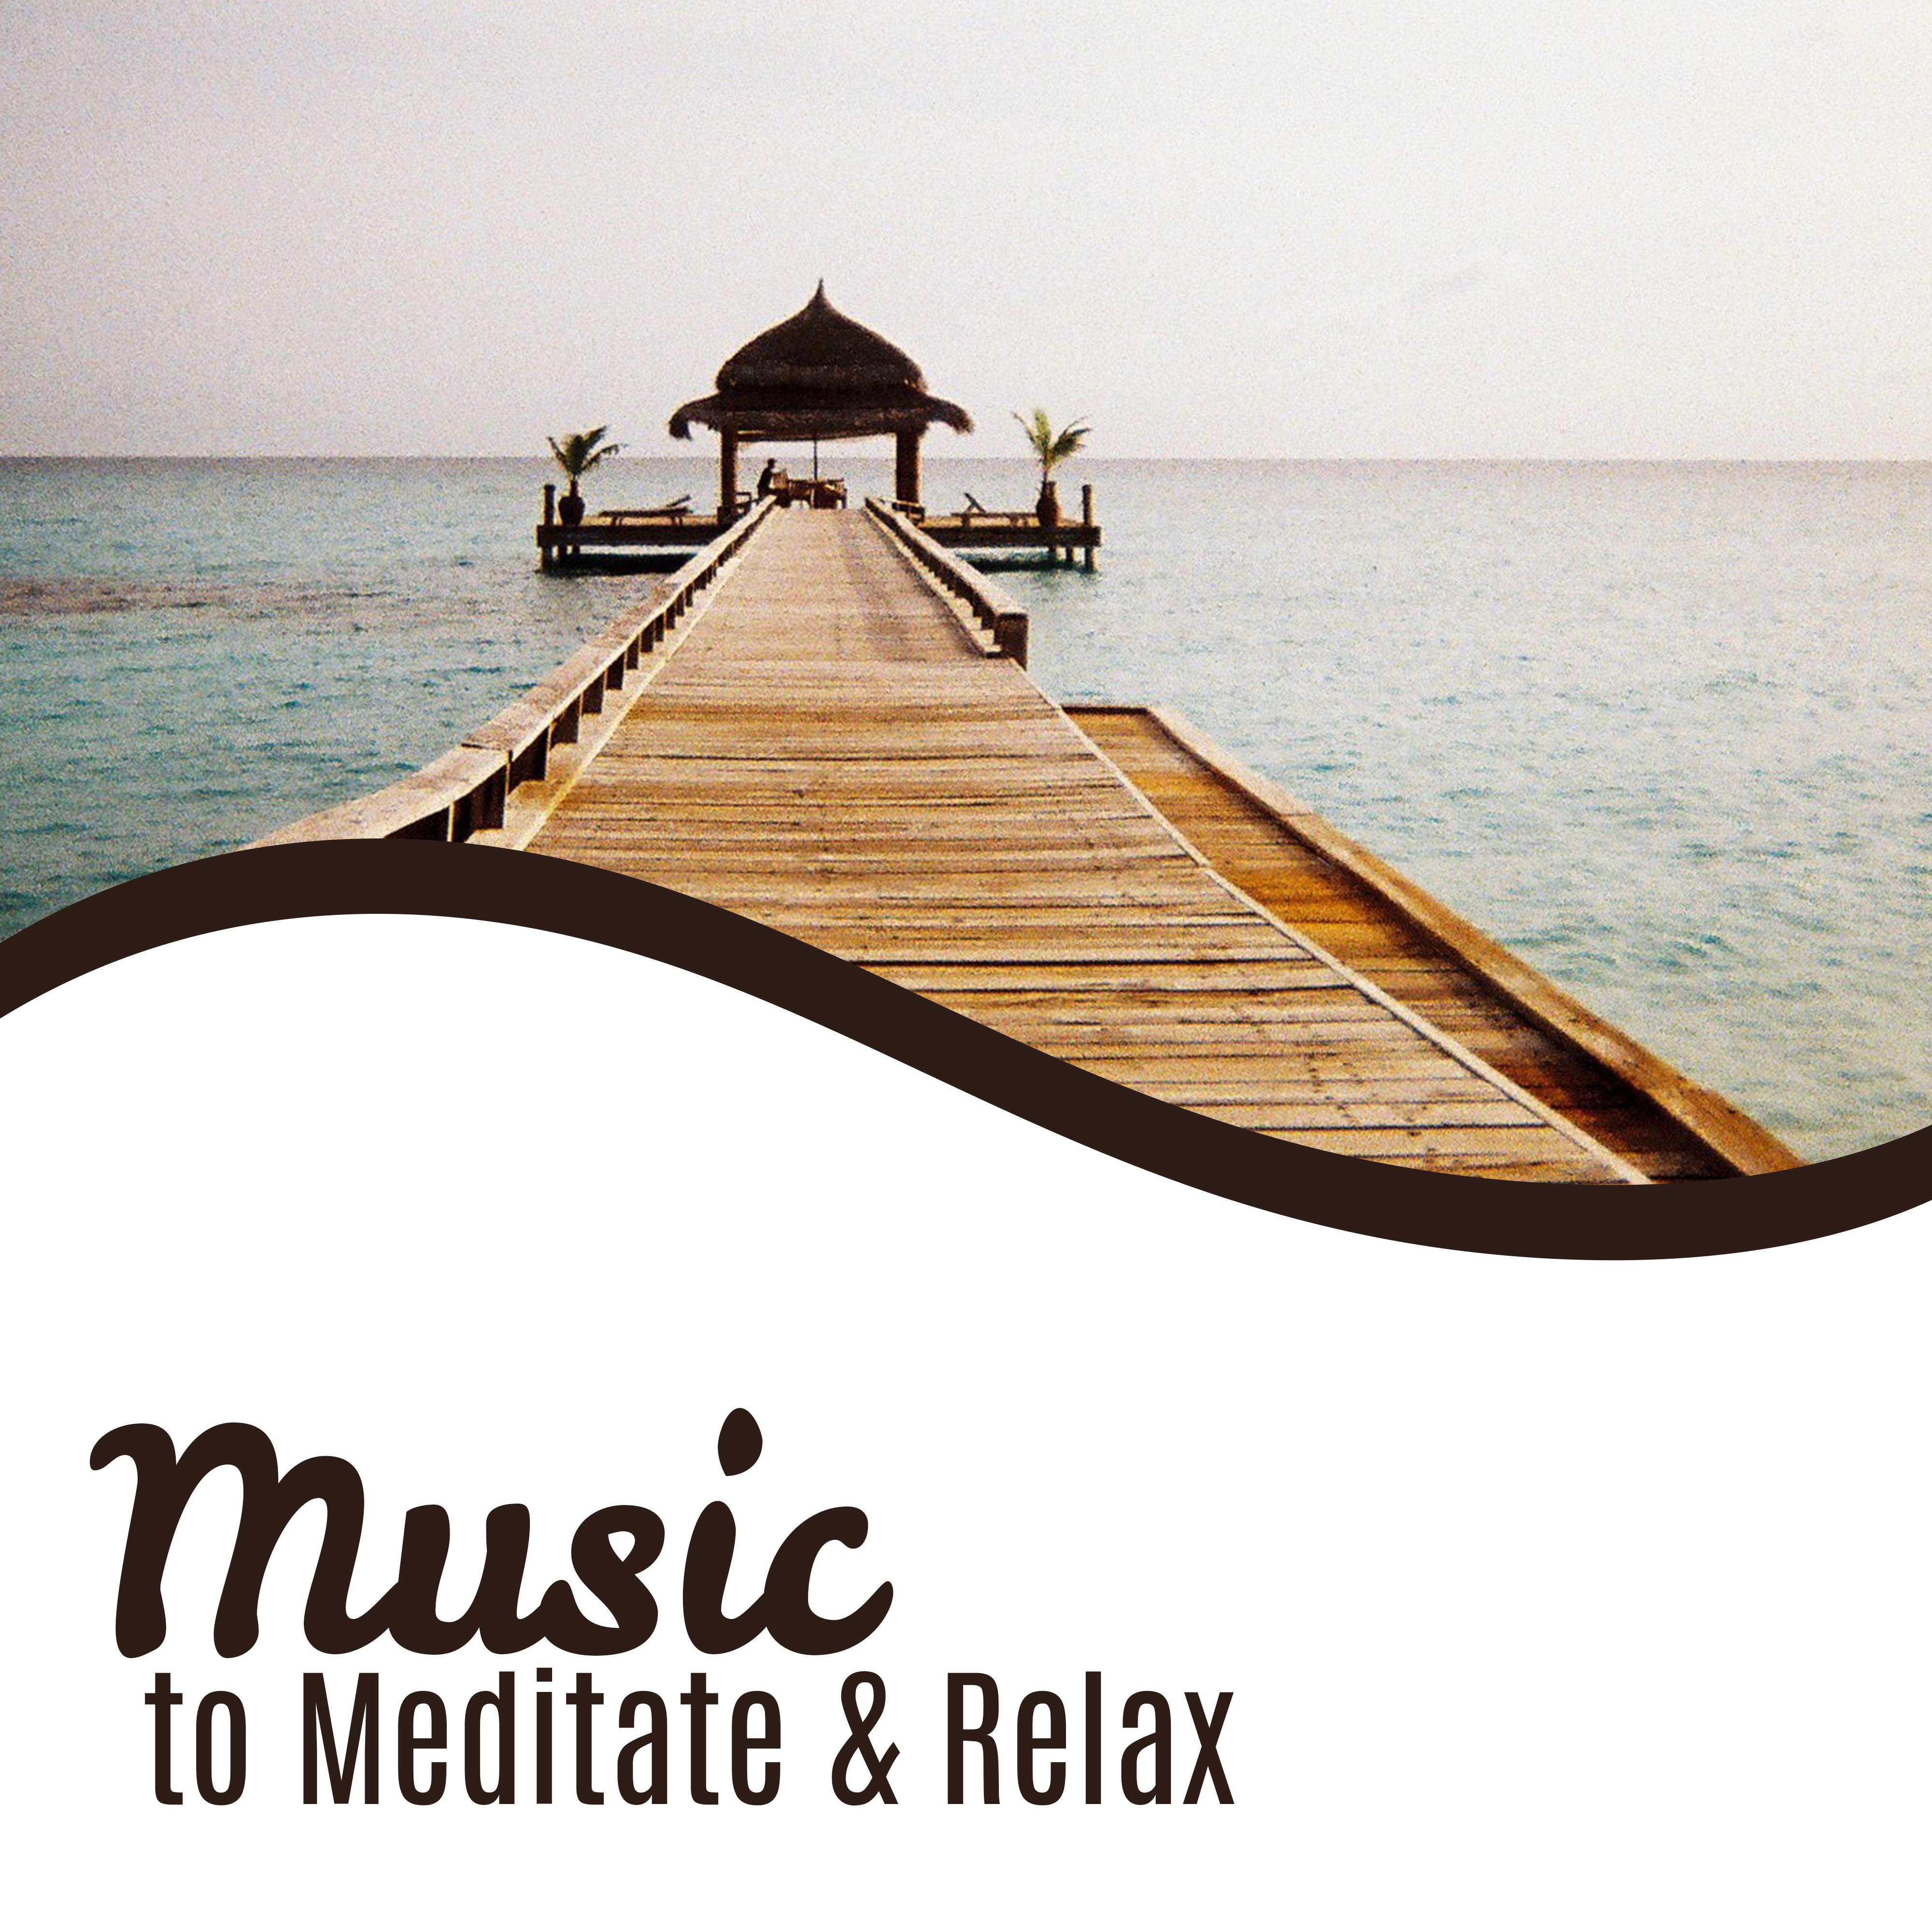 Music to Meditate  Relax  Soothing New Age Music, Meditation Calmness, Buddha Lounge, Rest Your Soul